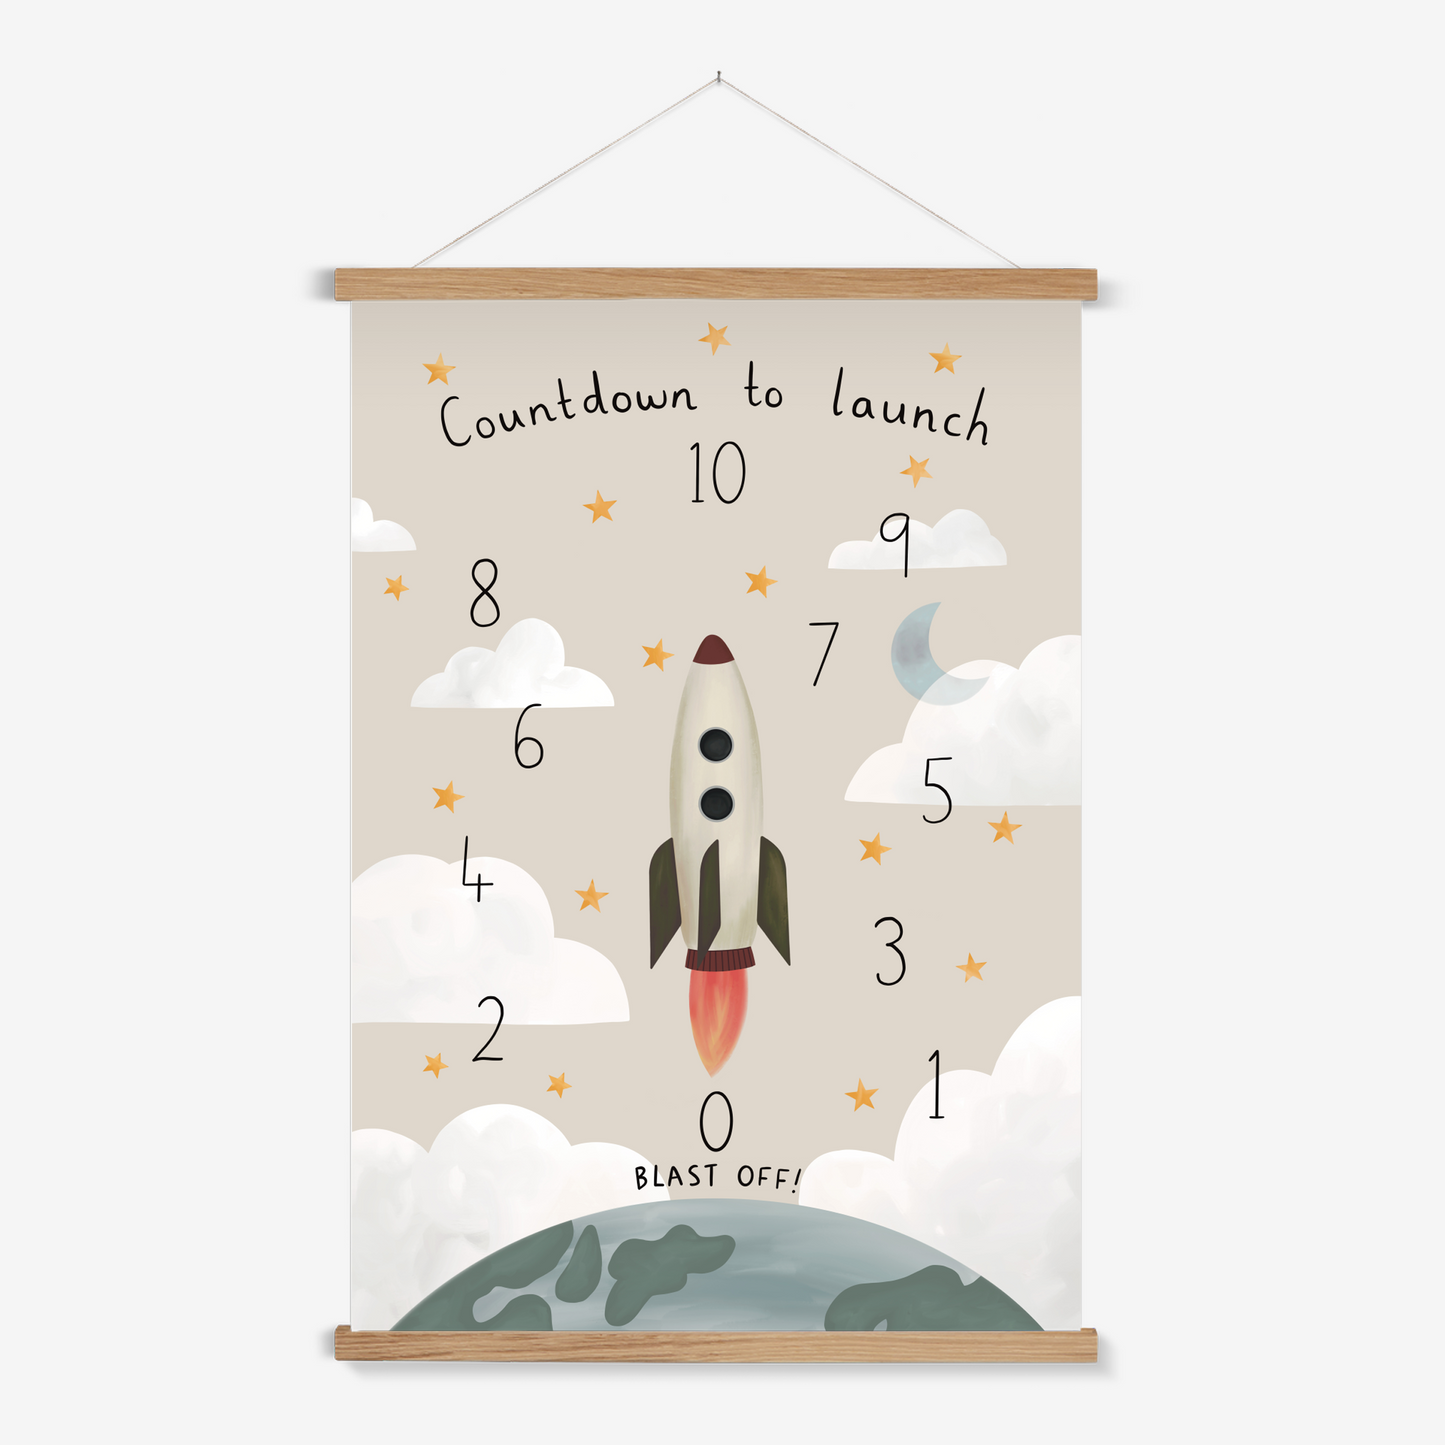 Countdown to launch in stone / Print with Hanger